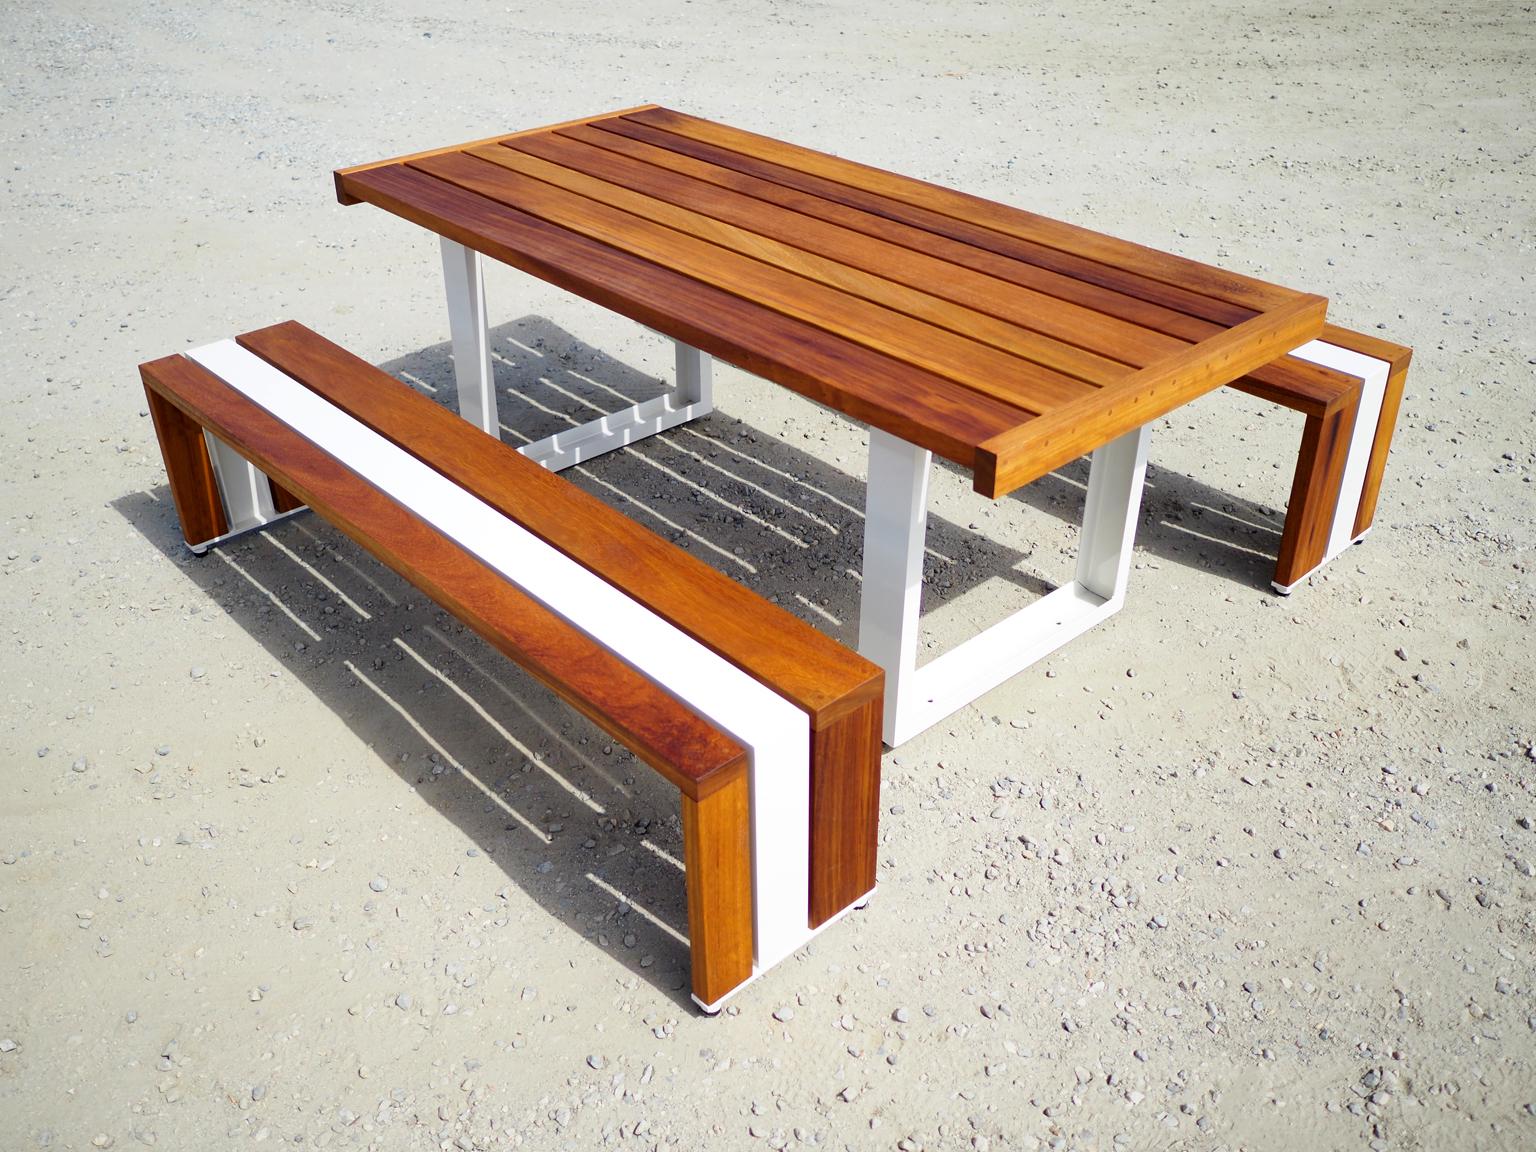 The SR table set is a new take on an old classic, available with your choice of white oak, redwood, or African teak (iroko), and 210 powder coated aluminum color options. All wood options come sealed or untreated to allow for the natural aging of